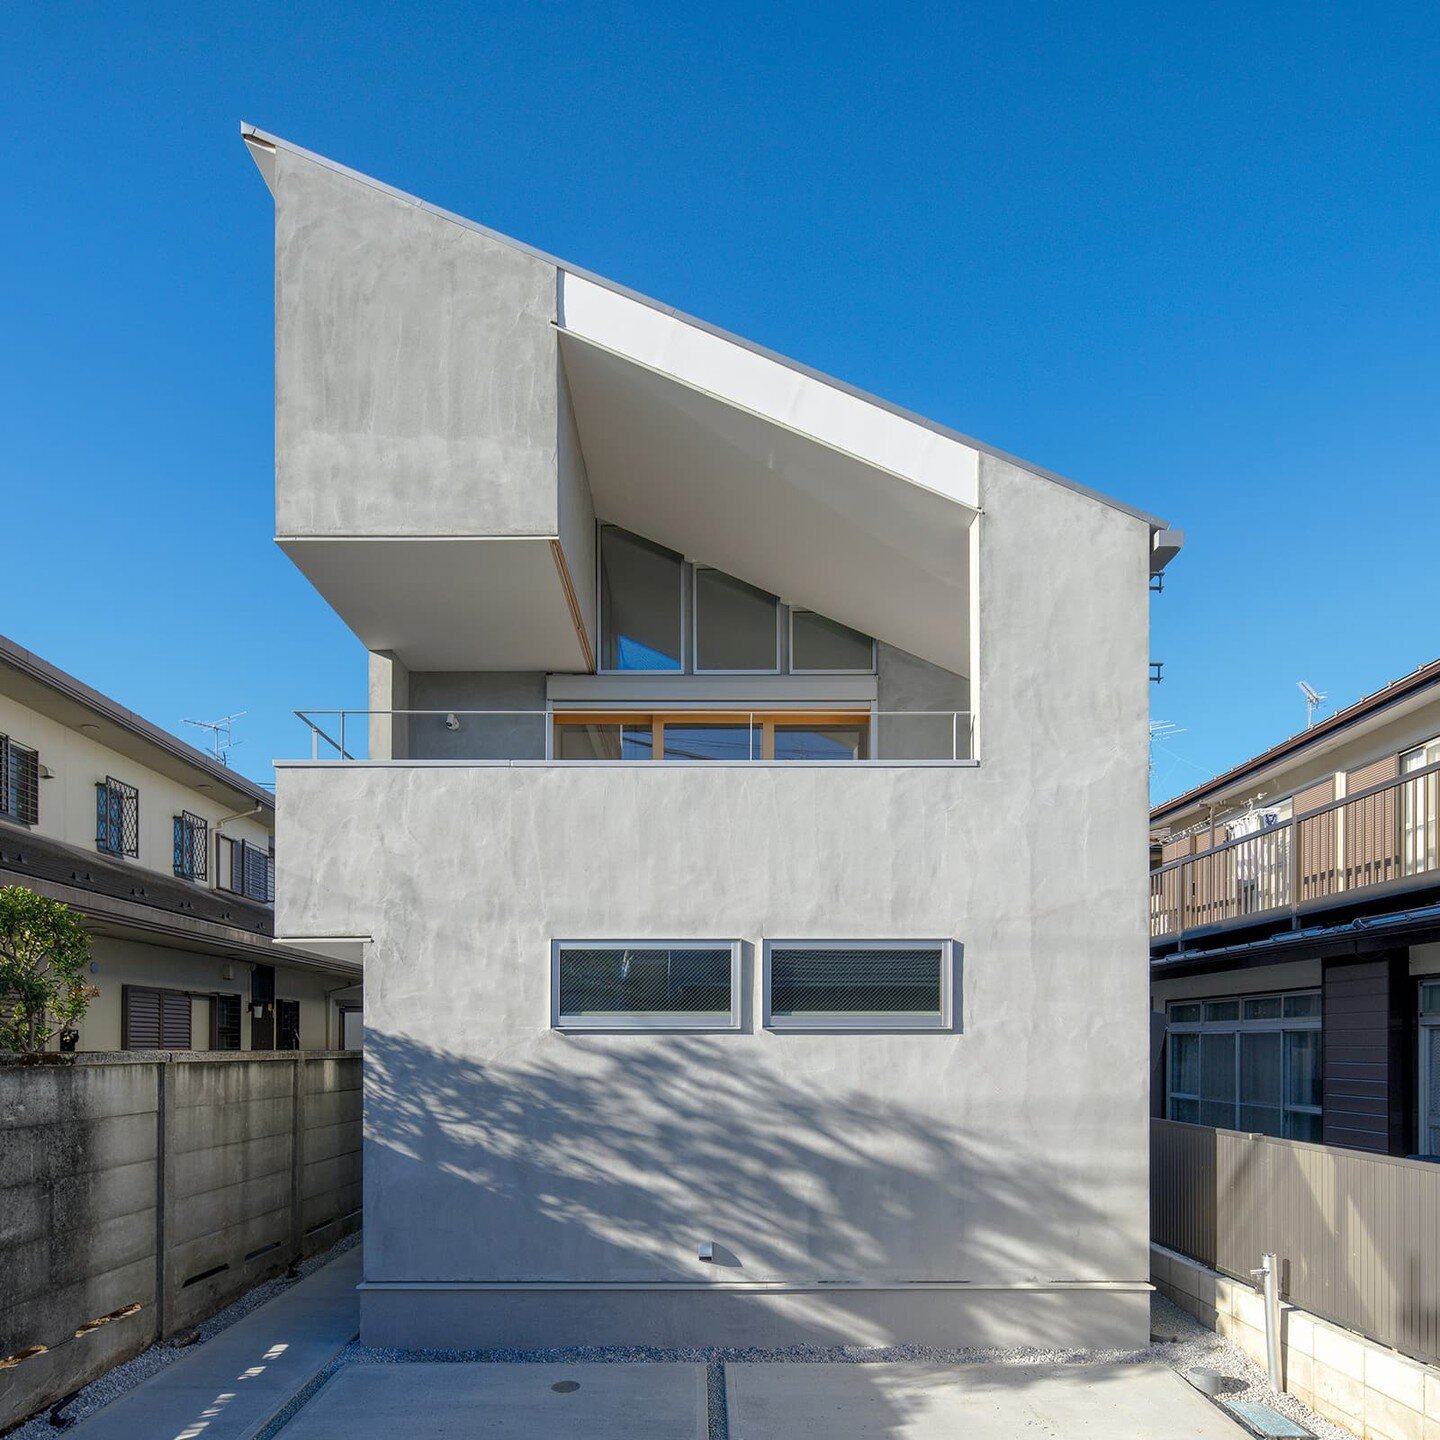 Recently completed project: Ogikubo House
-
site : Suginami-ku, Tokyo, Japan
year complete : 2024
usage : private house
site area : 91 m2
gross floor area : 112 m2
structure : timber
architect : @kominoru 
contractor : KRONOS
-
敷地 : 東京都杉並区
竣工 : 2024
